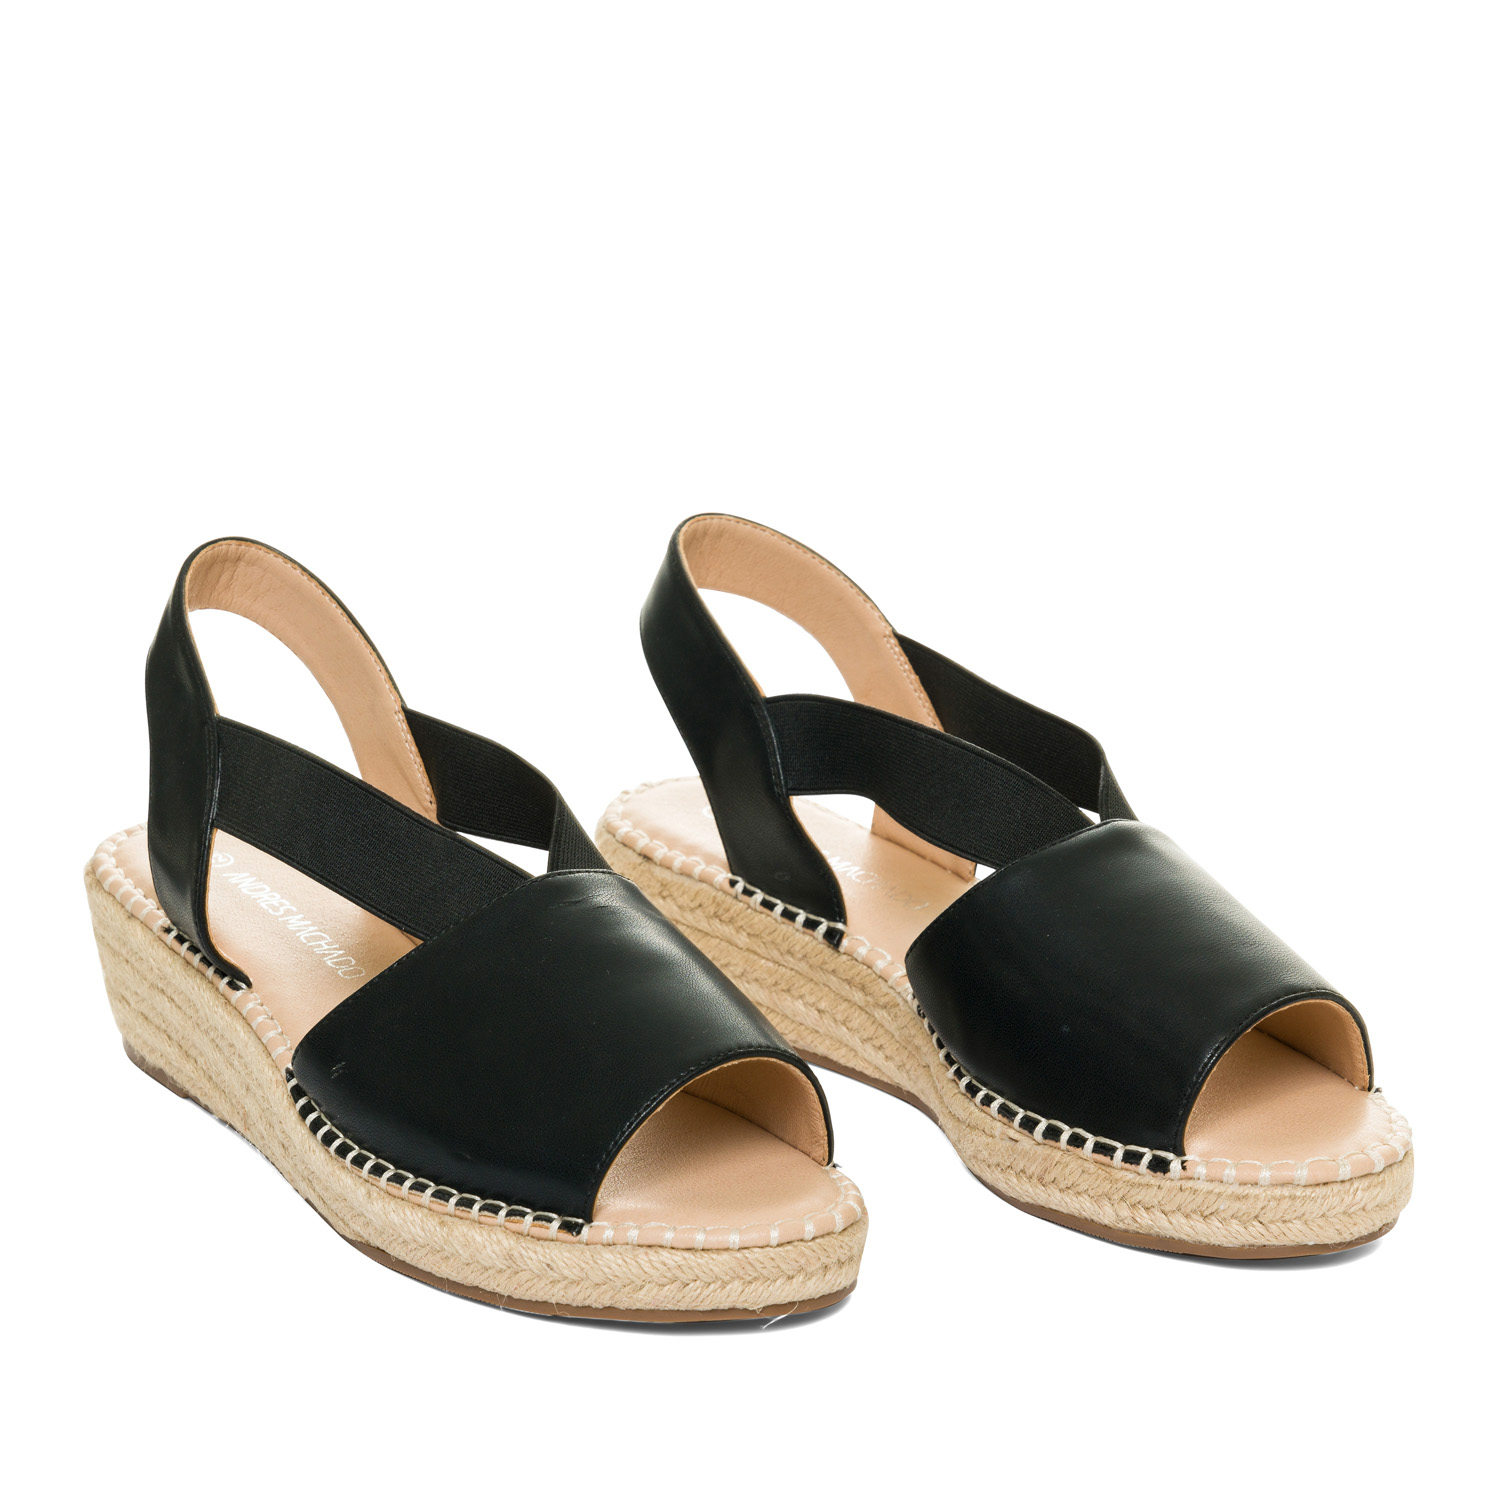 Black faux leather sandals with jute wedge 